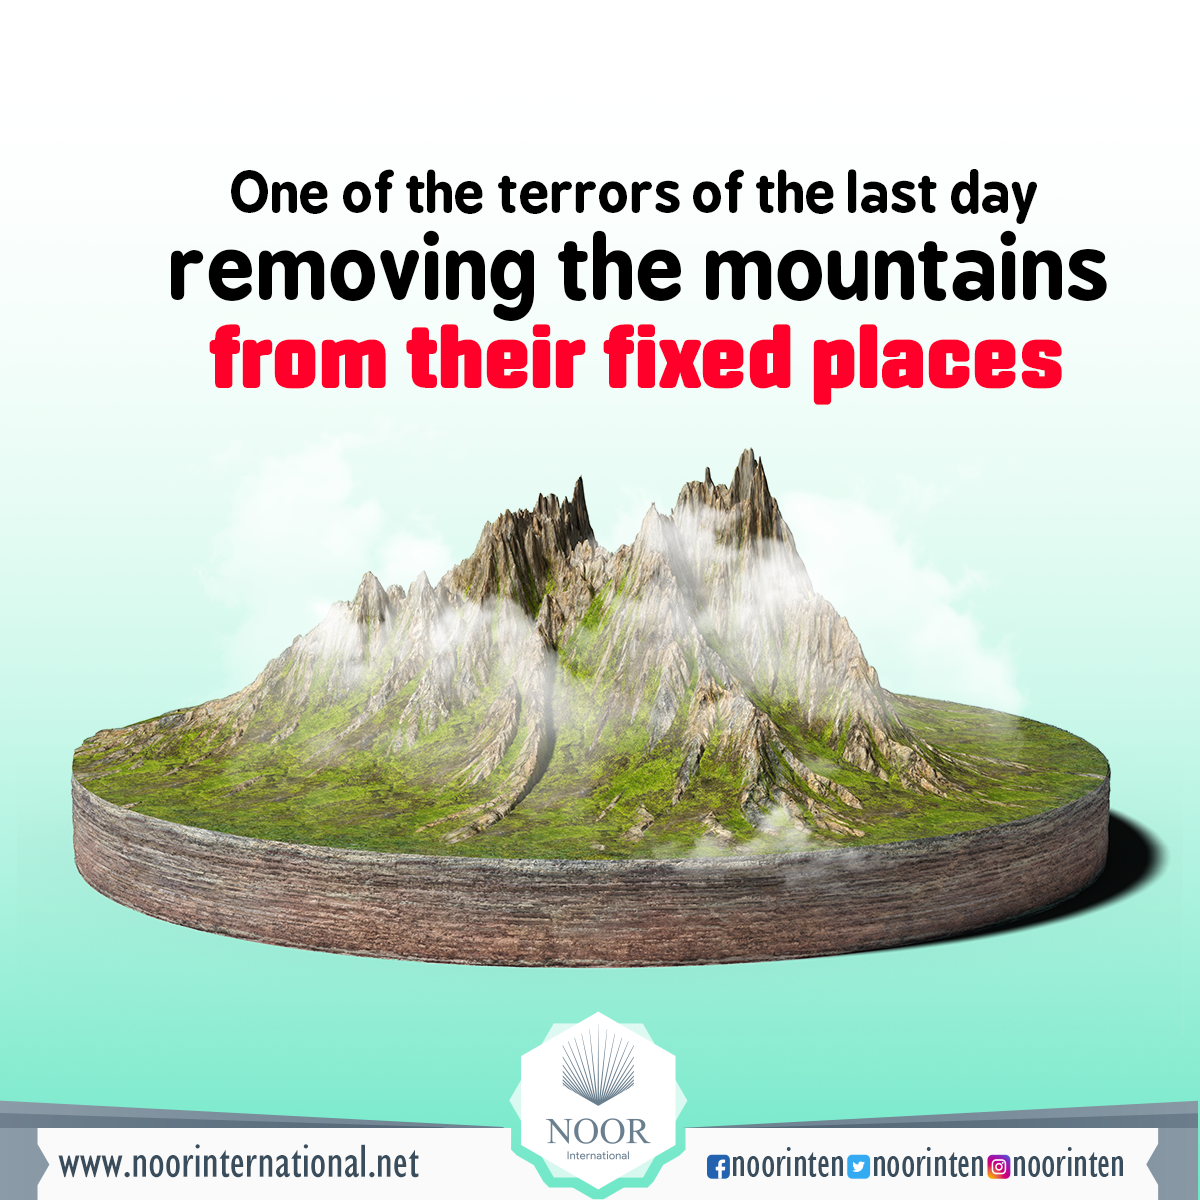 One of the terrors of the last day is removing the mountains from their fixed places